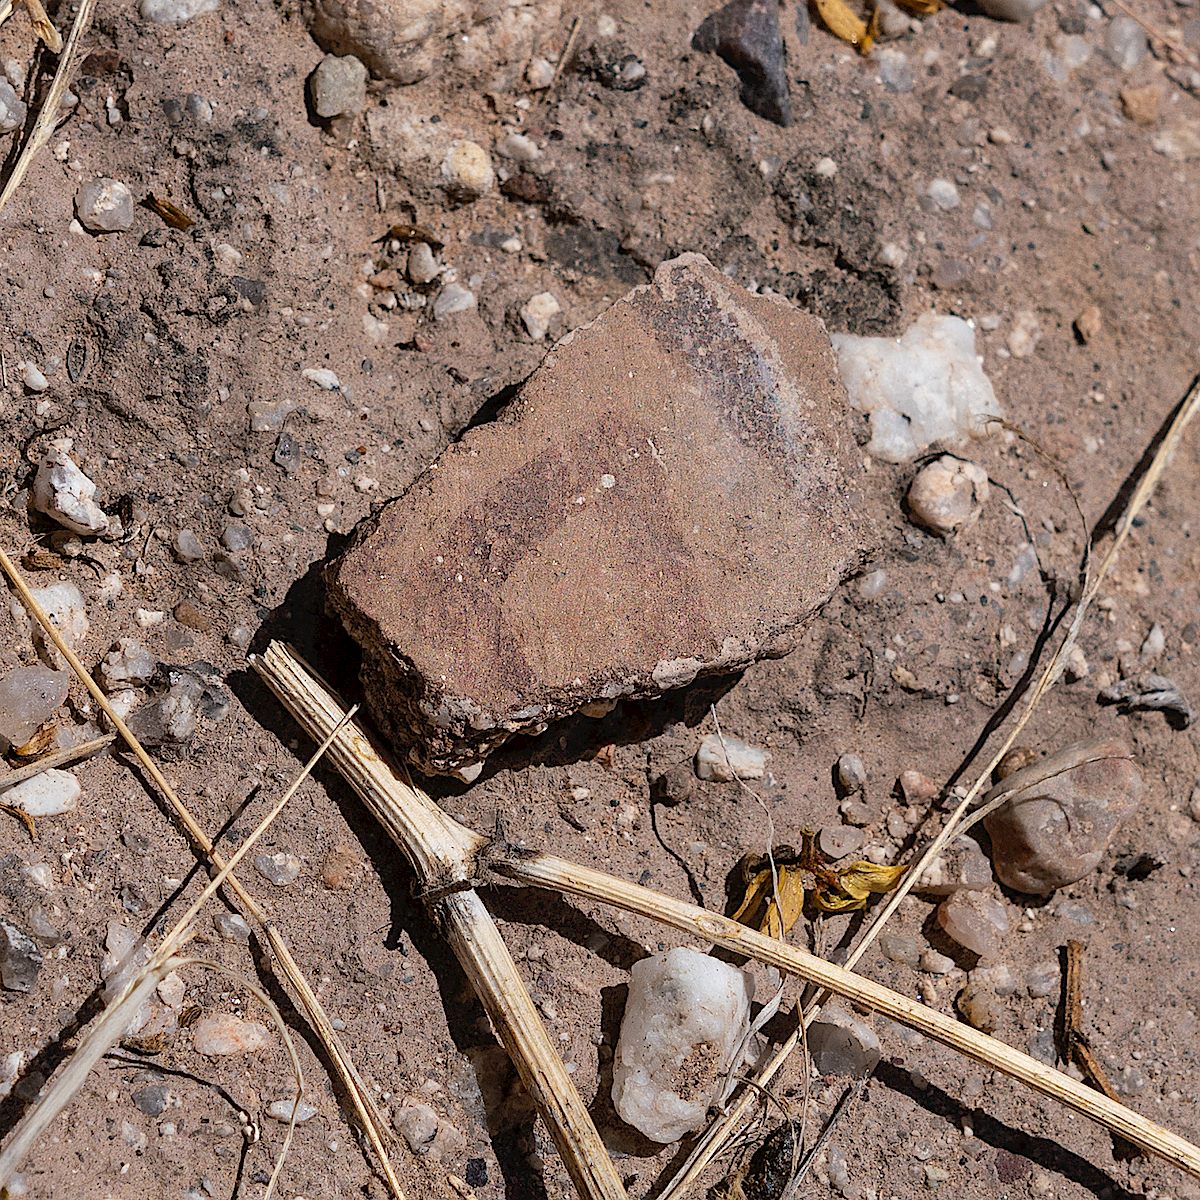 Second Canyon Sherd. May 2018.